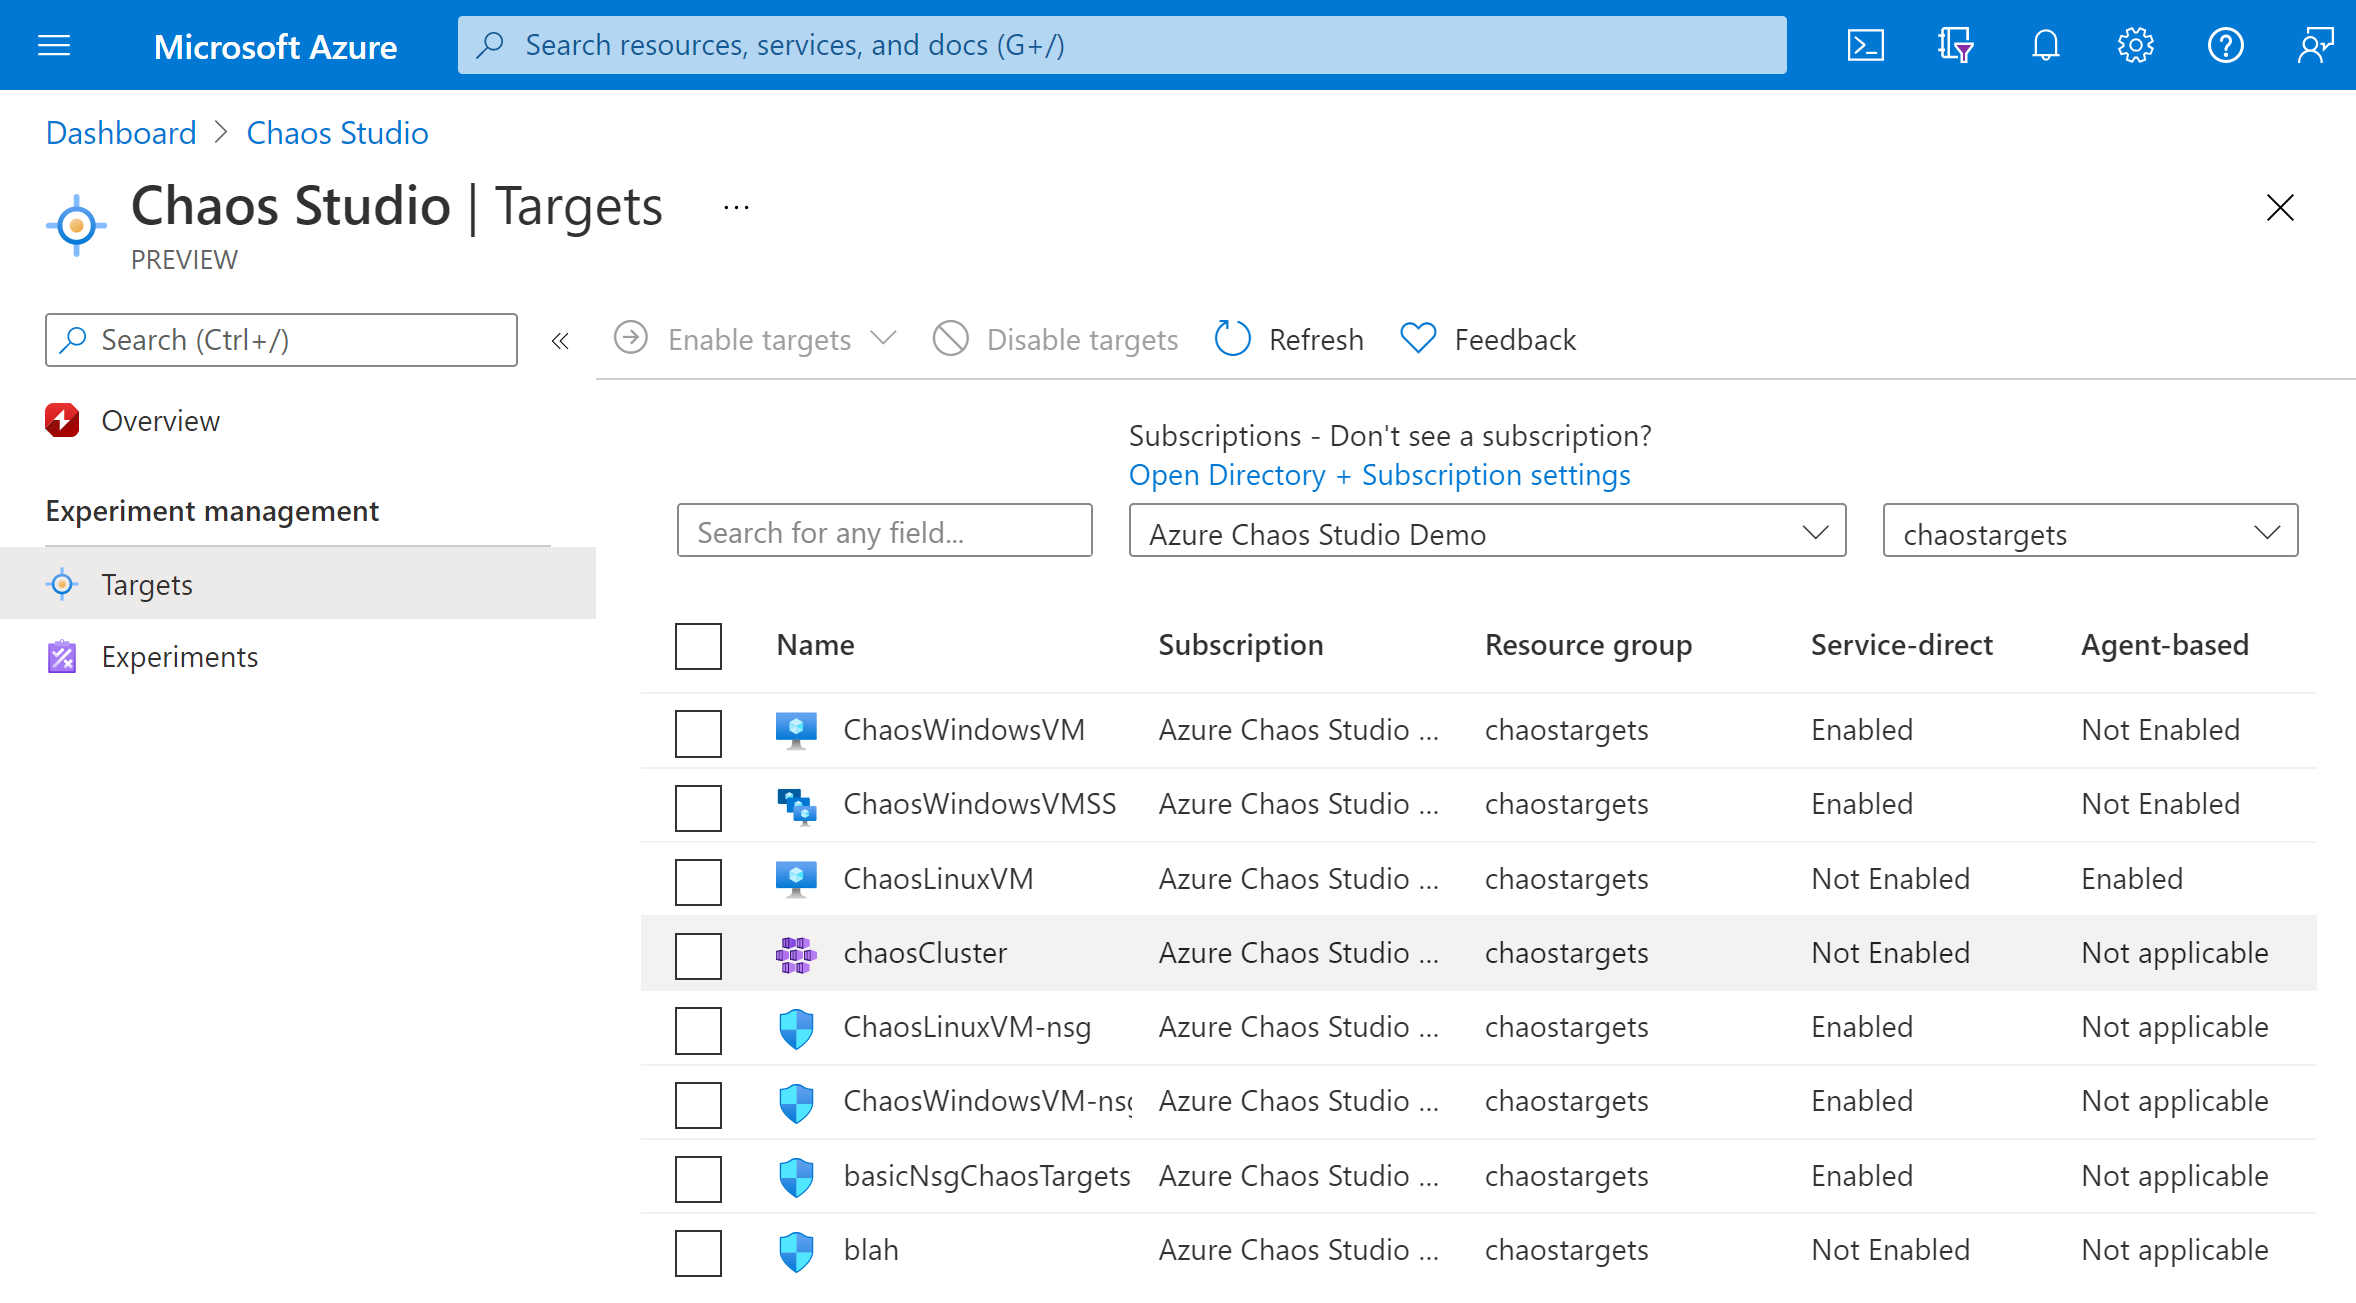 Targets view in the Azure portal